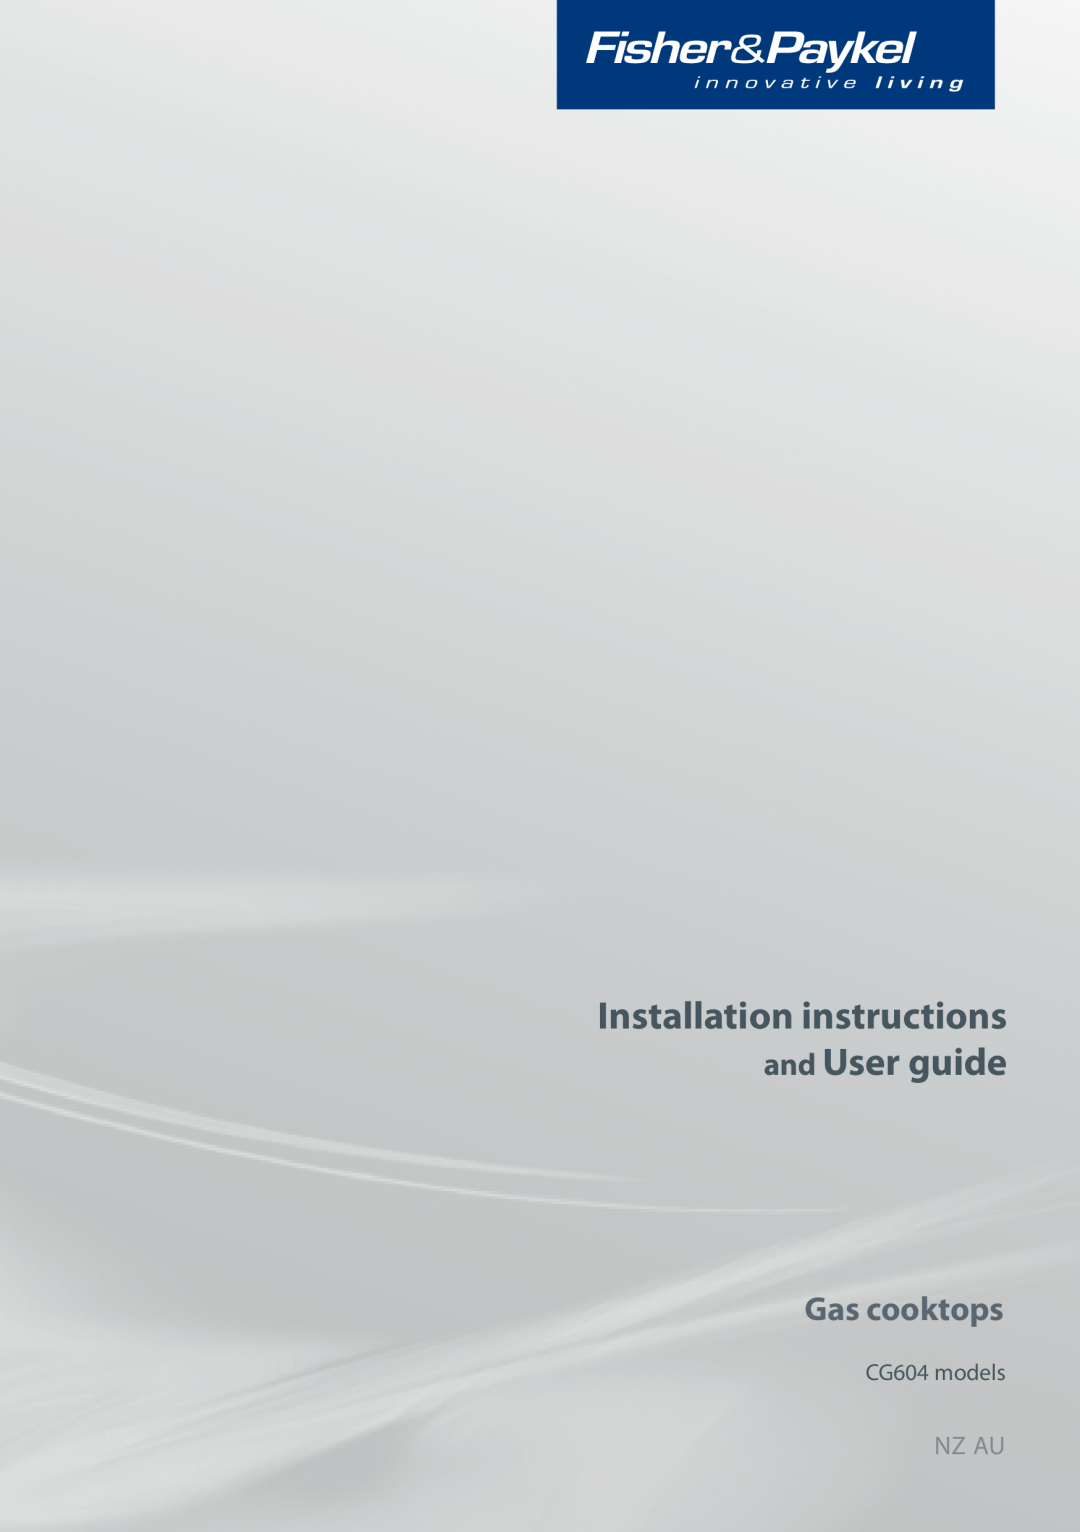 Fisher & Paykel CG604 installation instructions Installation instructions and User guide, Gas cooktops, Nz Au 